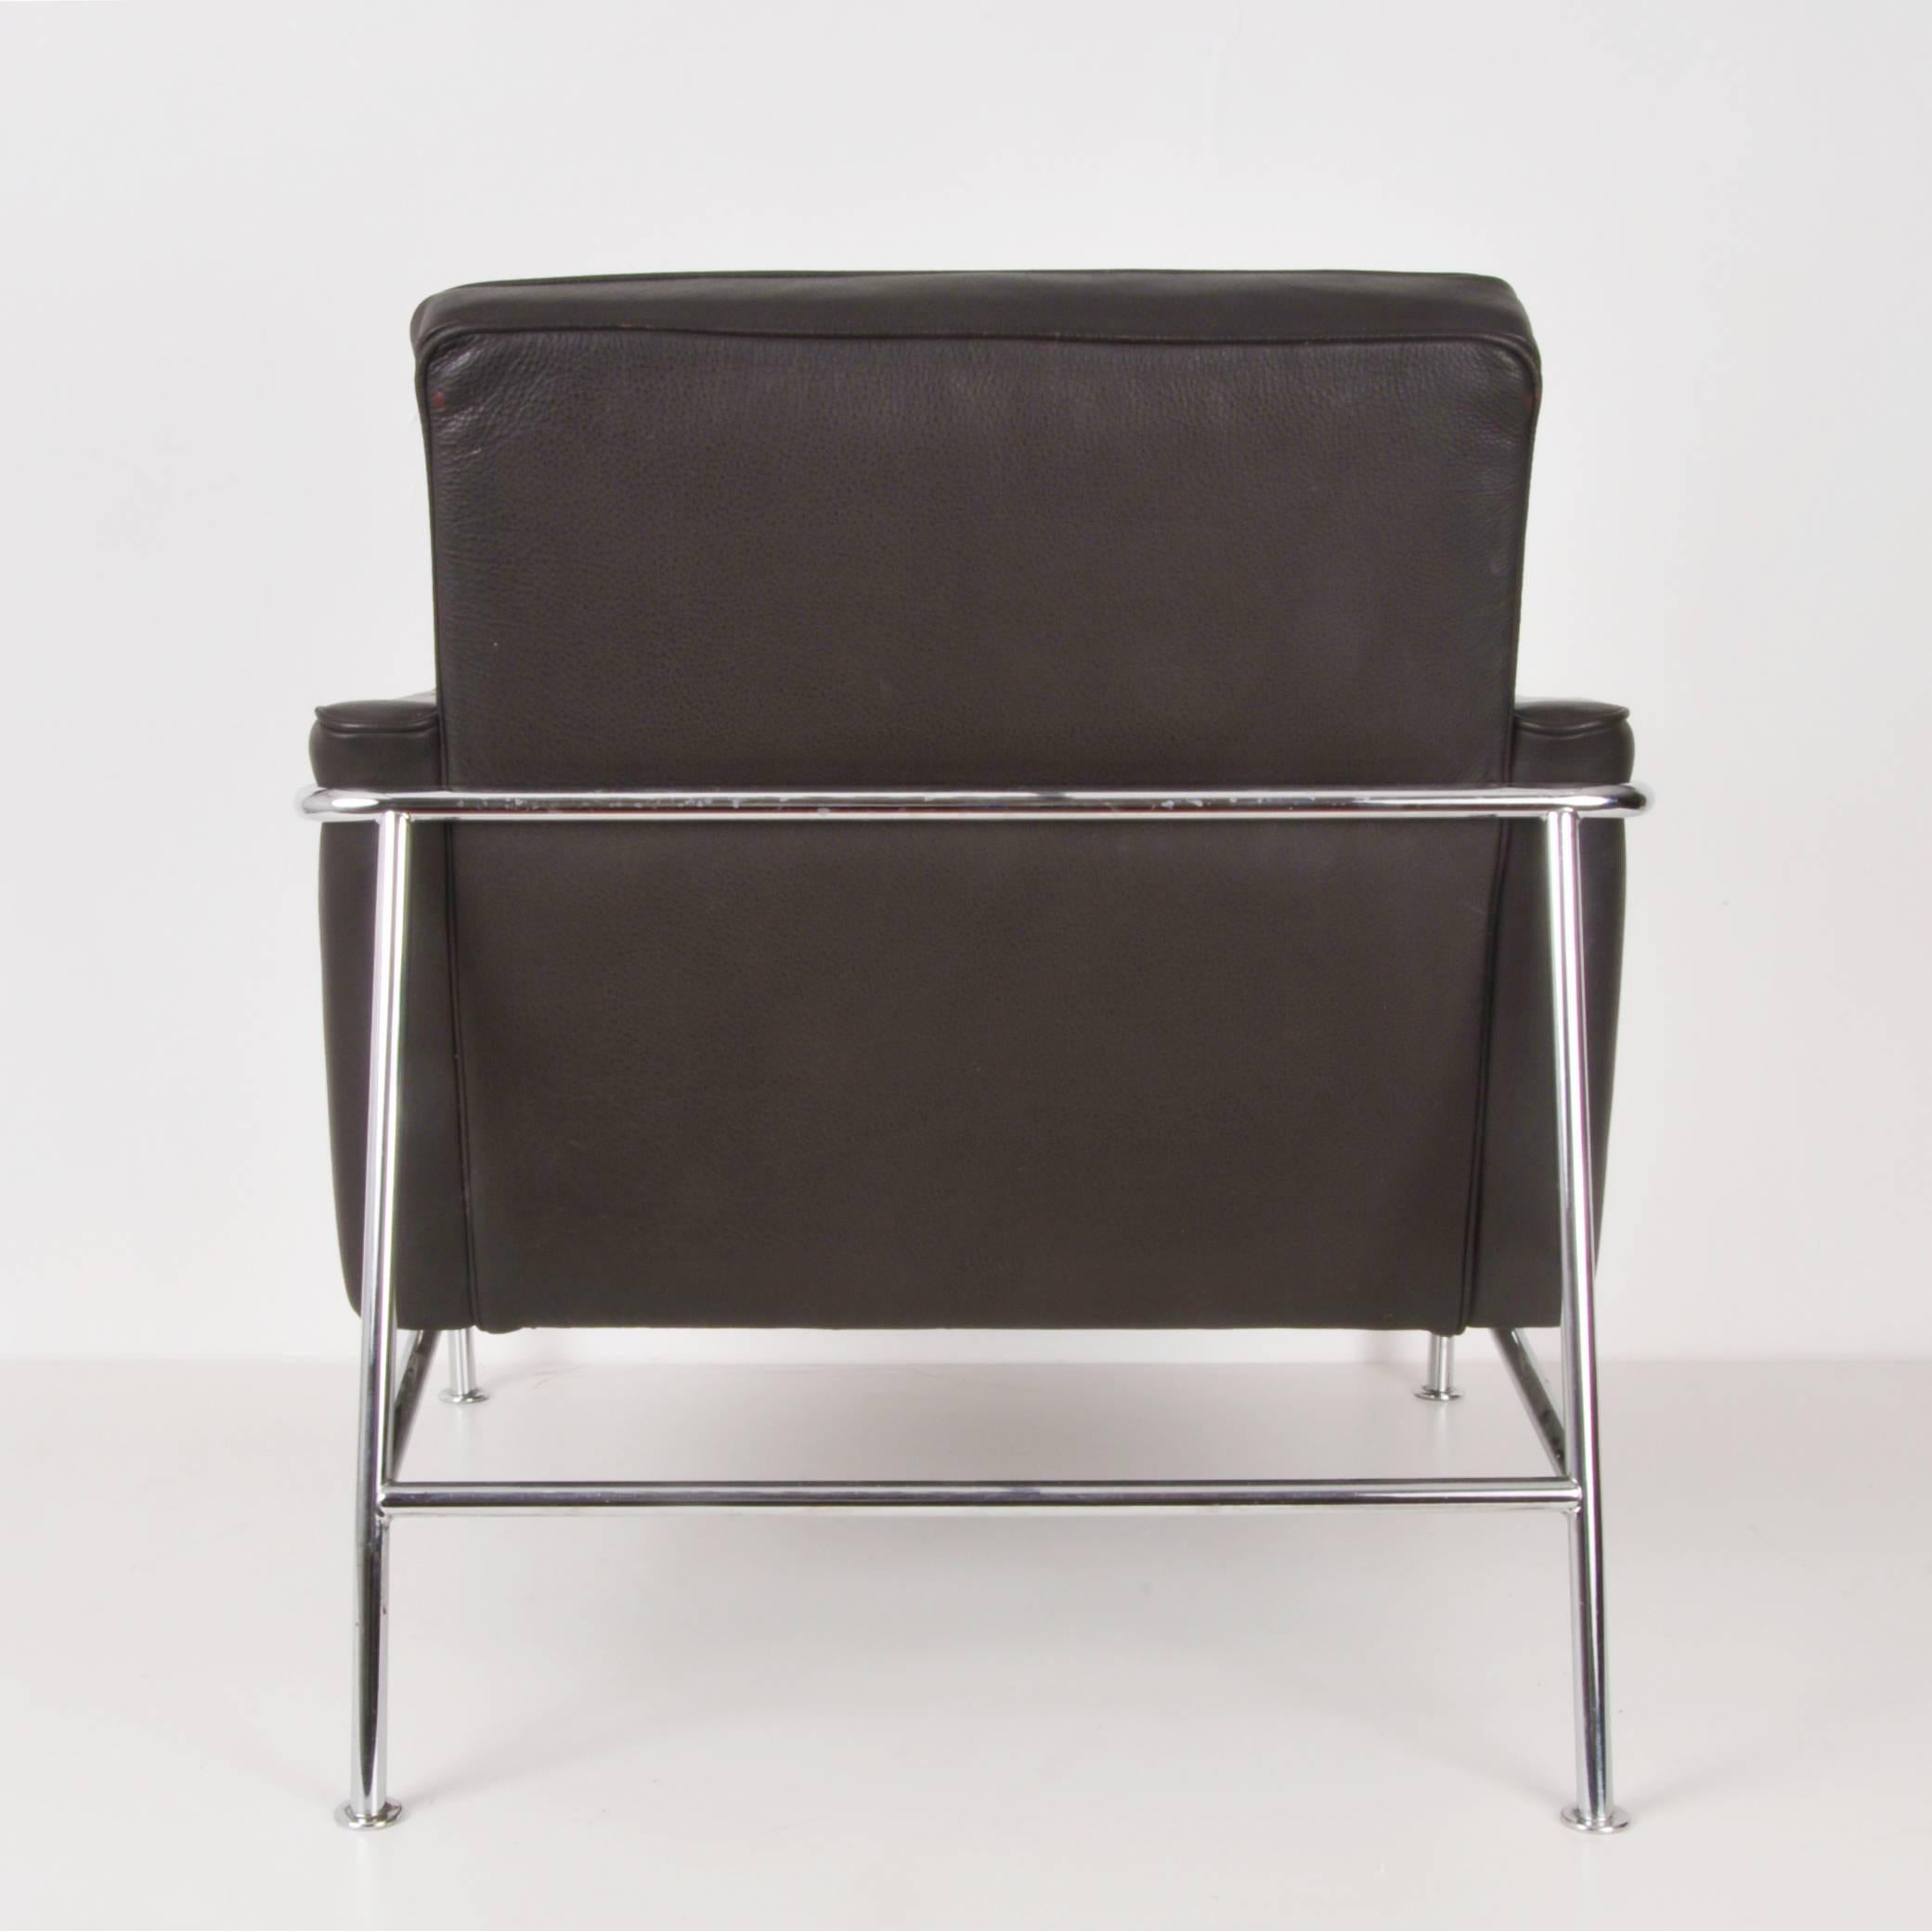 Steel Midcentury Dark Brown Leather Lounge Chair Attributed to Arne Jacobsen, 1956 For Sale